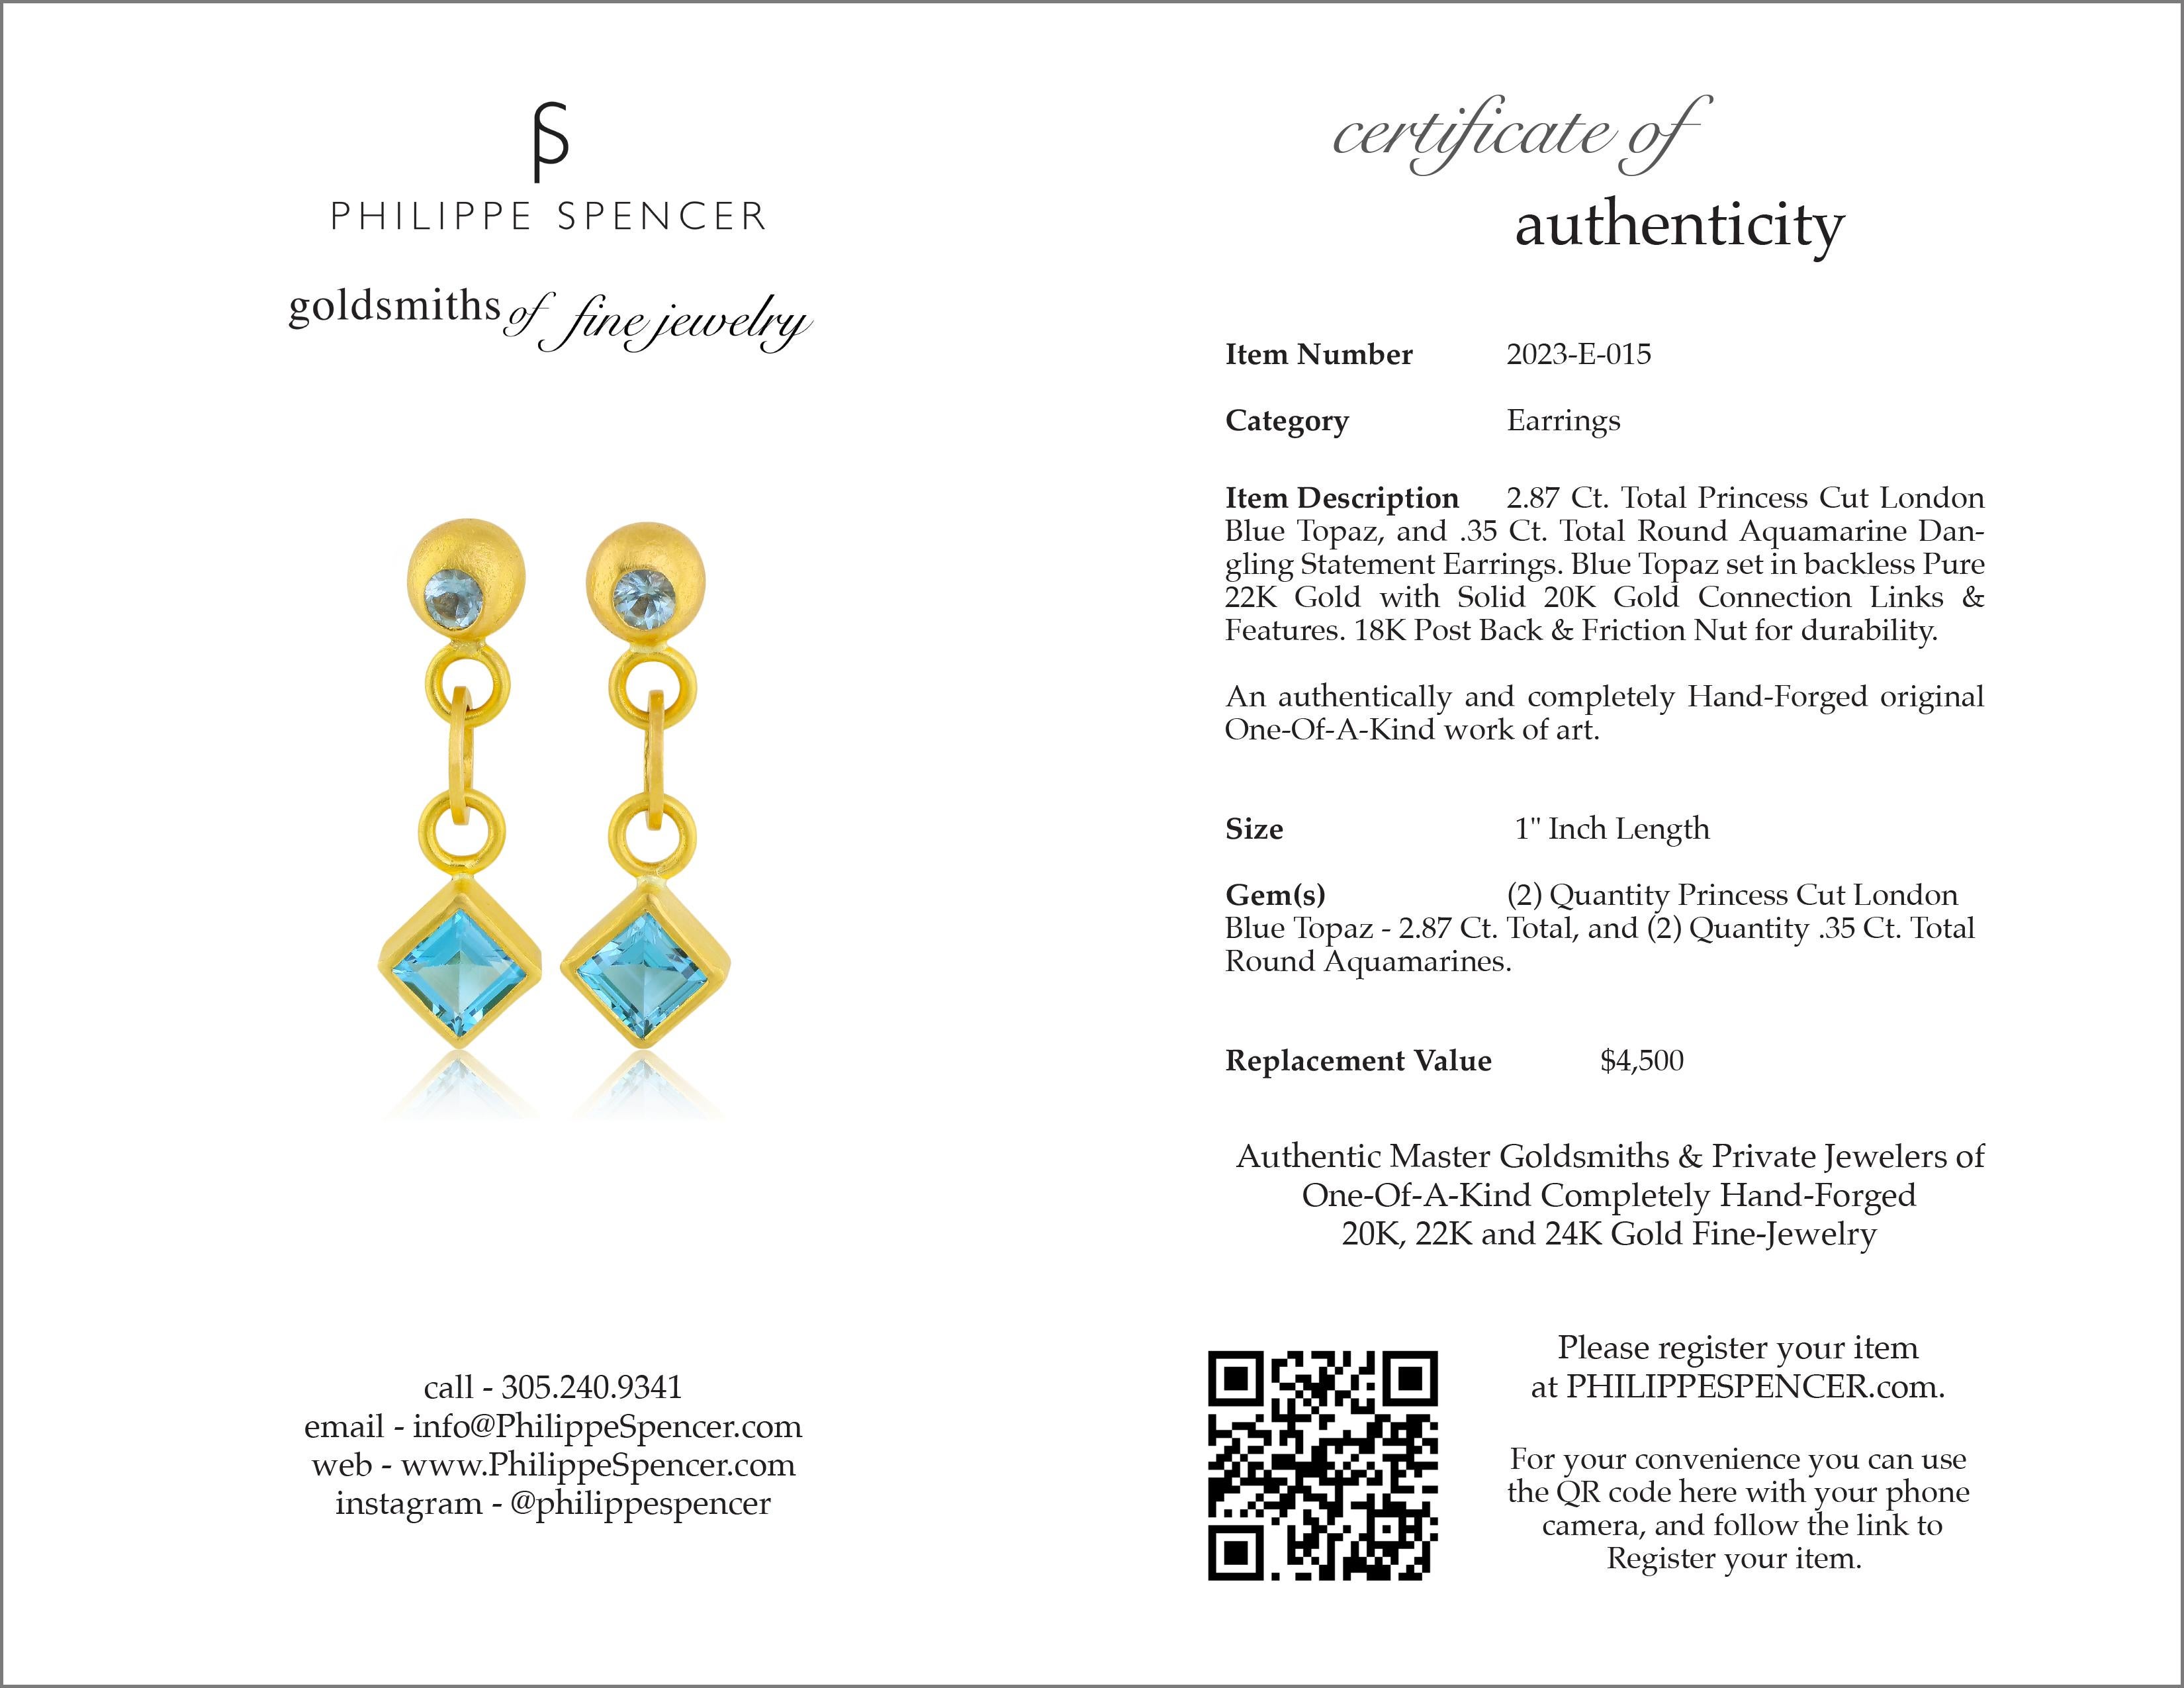 Princess Cut PHILIPPE SPENCER Blue Topaz and Aquamarine in 22K & 20K Gold Dangling Earrings For Sale